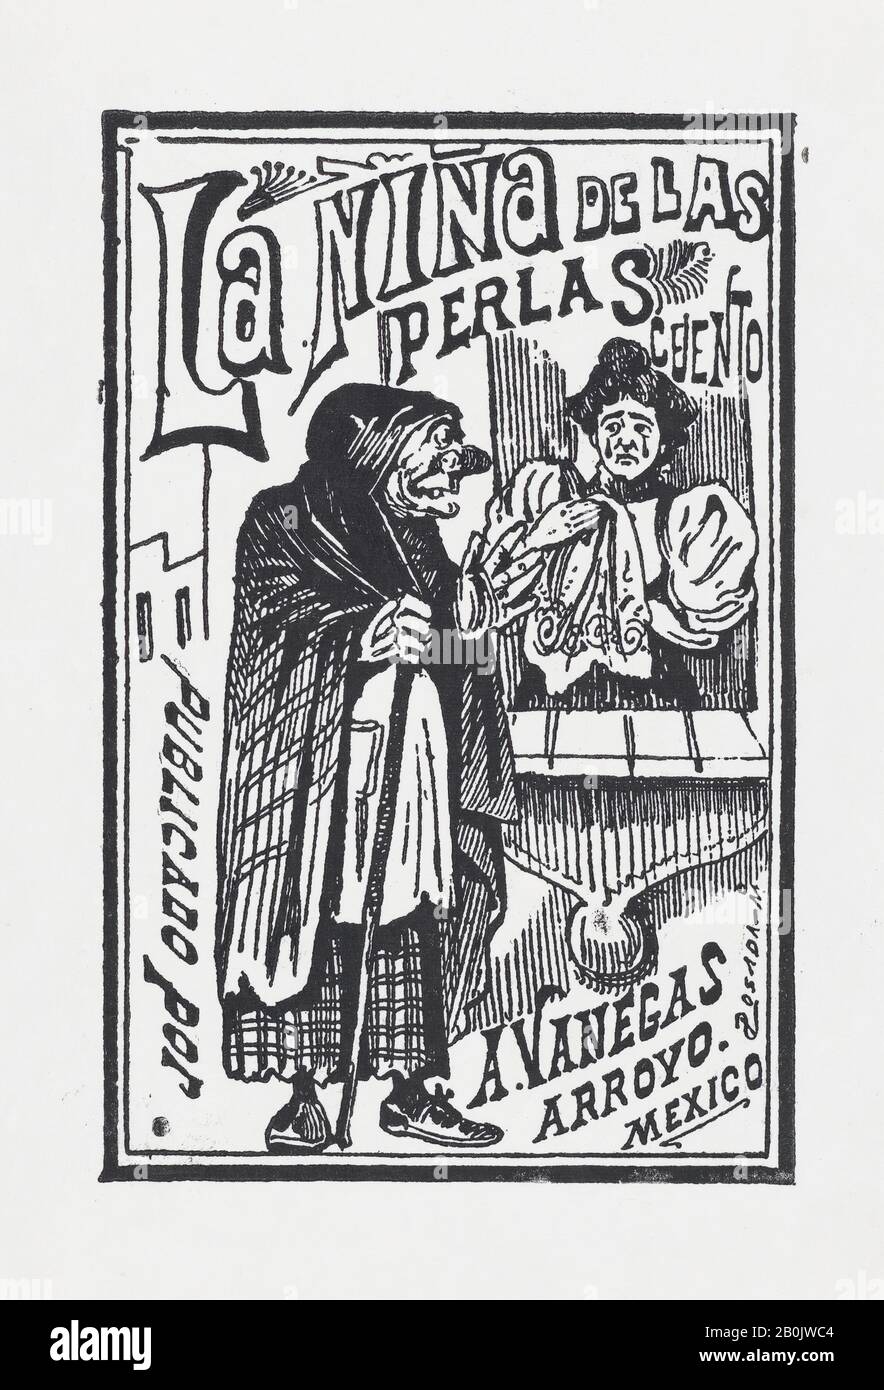 José Guadalupe Posada, A woman crying with a handkerchief in her hand talking to an old hag, illustration for 'La Niña de las Perlas, published by Antonio Vanegas Arroyo, José Guadalupe Posada (Mexican, 1851–1913), ca. 1880–1910, Wood engraving, Sheet: 6 11/16 × 4 5/8 in. (17 × 11.7 cm), Image: 5 3/8 × 3 7/16 in. (13.6 × 8.8 cm), Prints Stock Photo